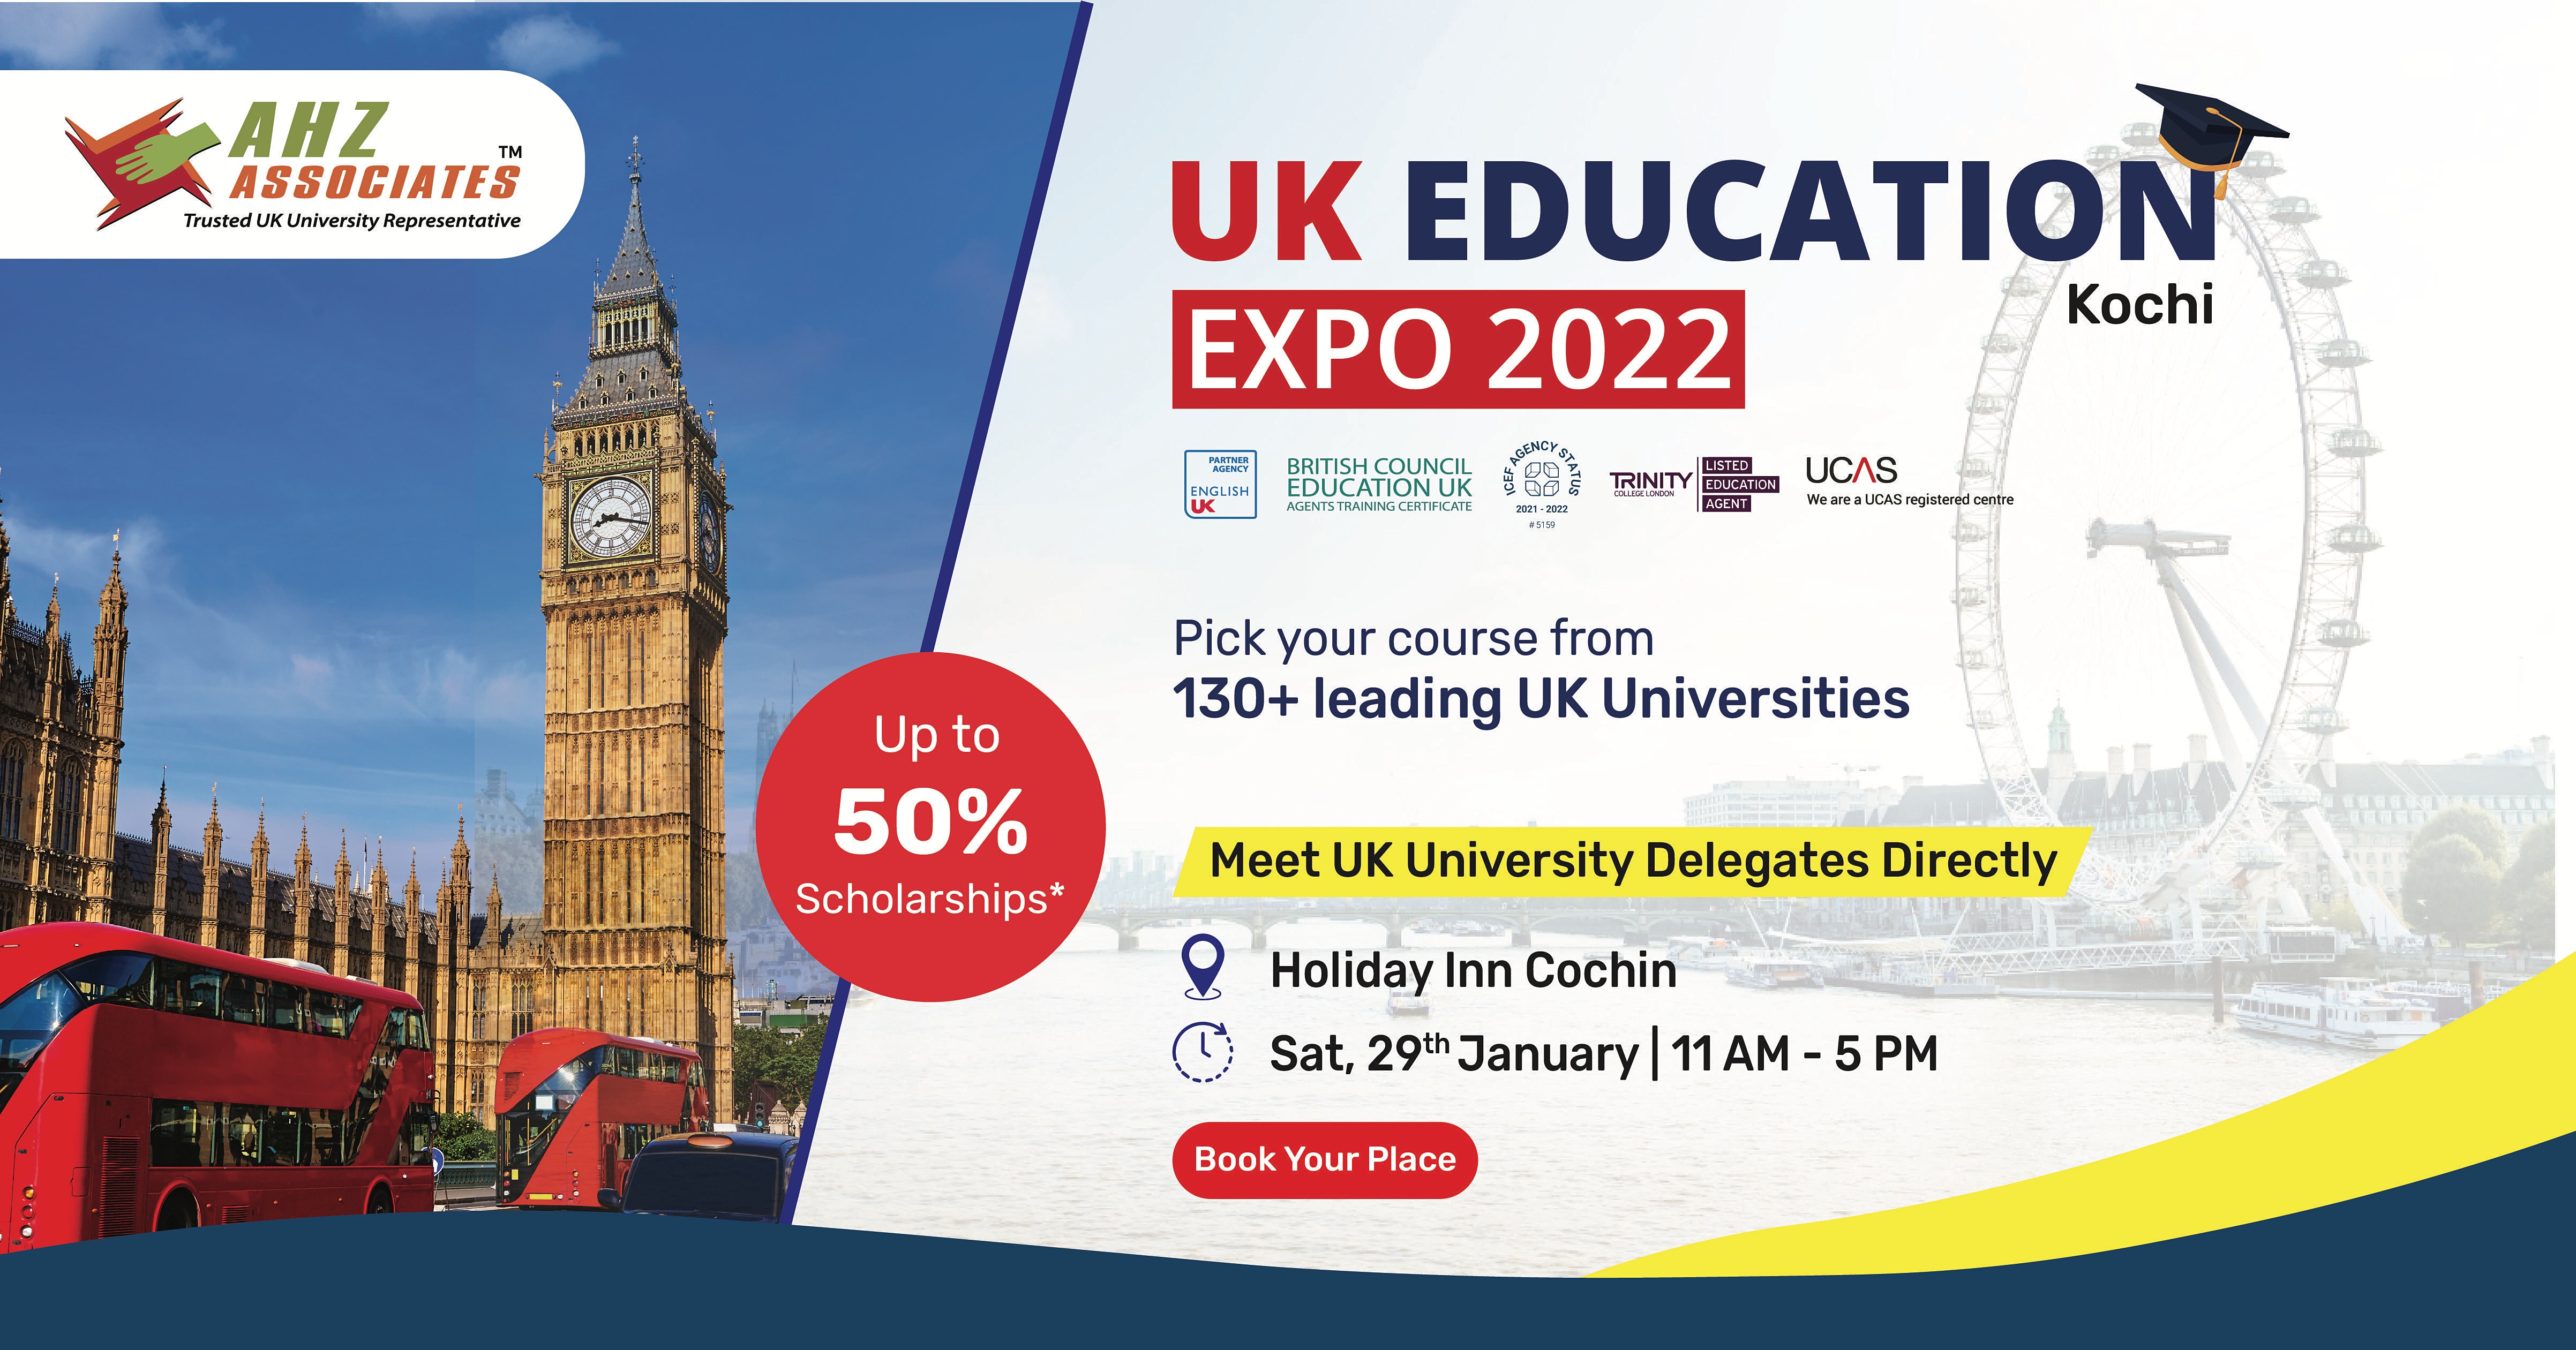 UK Education Expo 2022 - Cochin Tickets | EventBookings